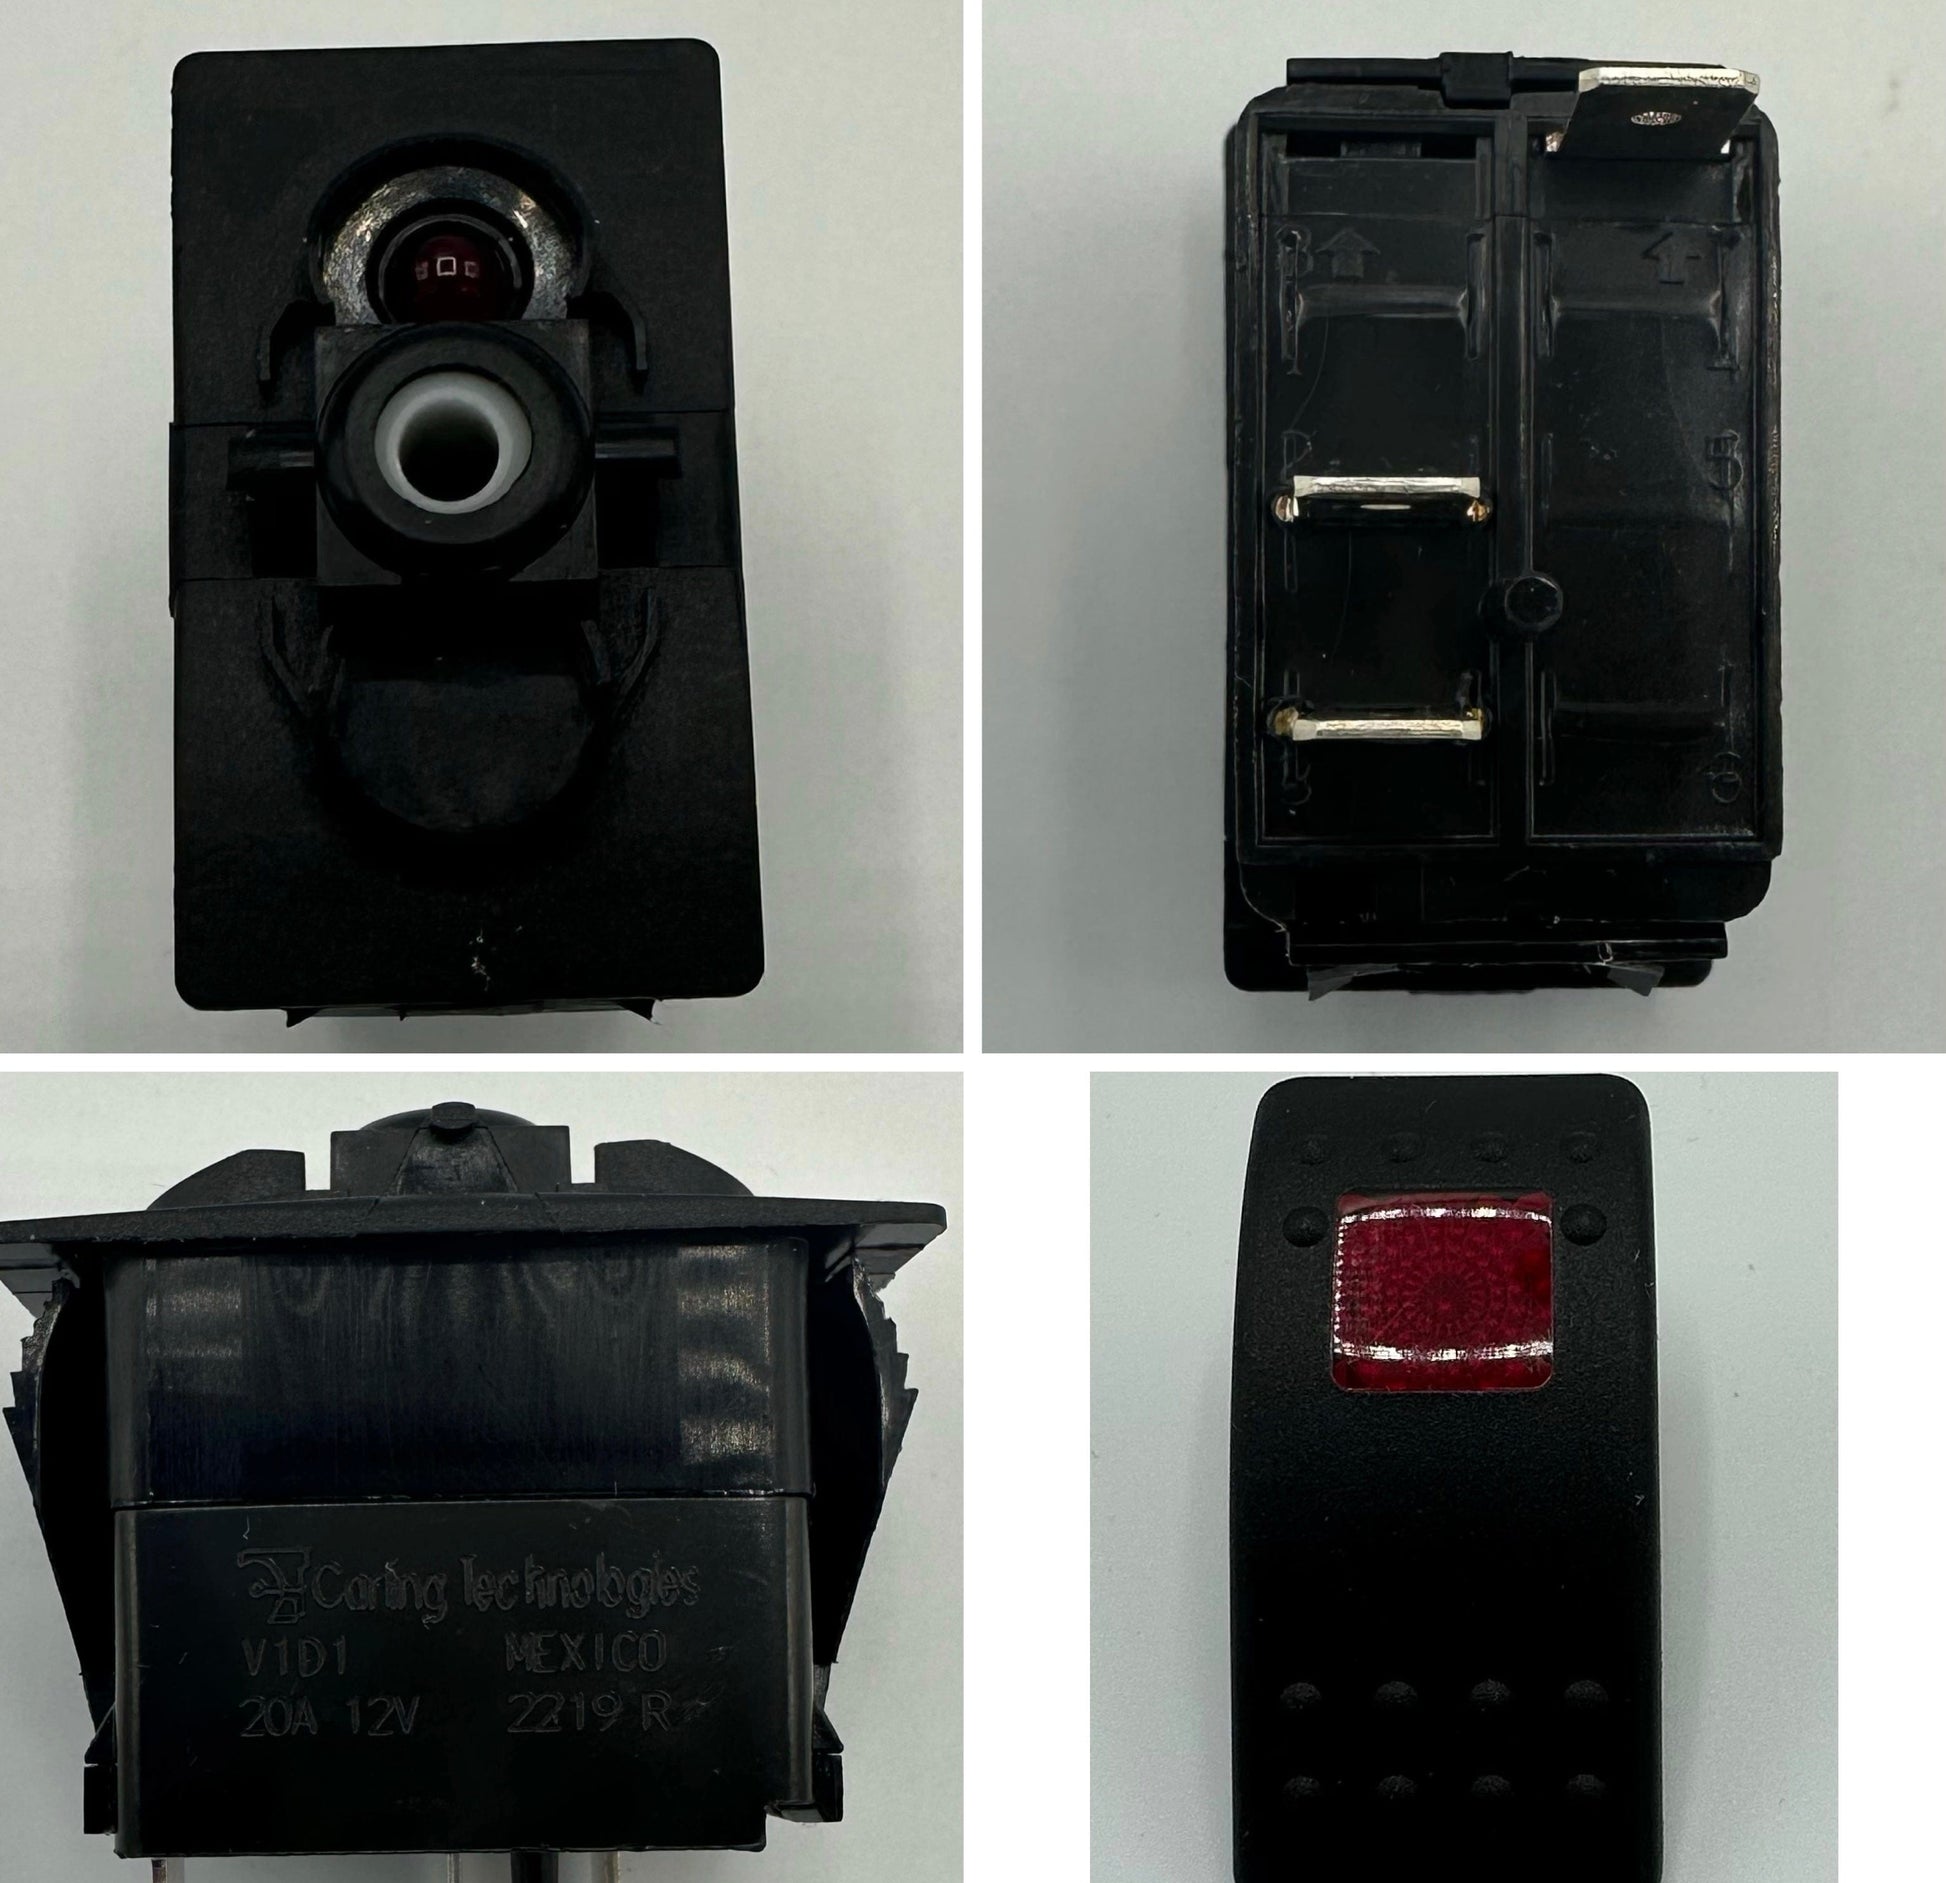 Carling Technologies, On/Off Two Position Switch with Red Light - V1D1BT0B-00000-00